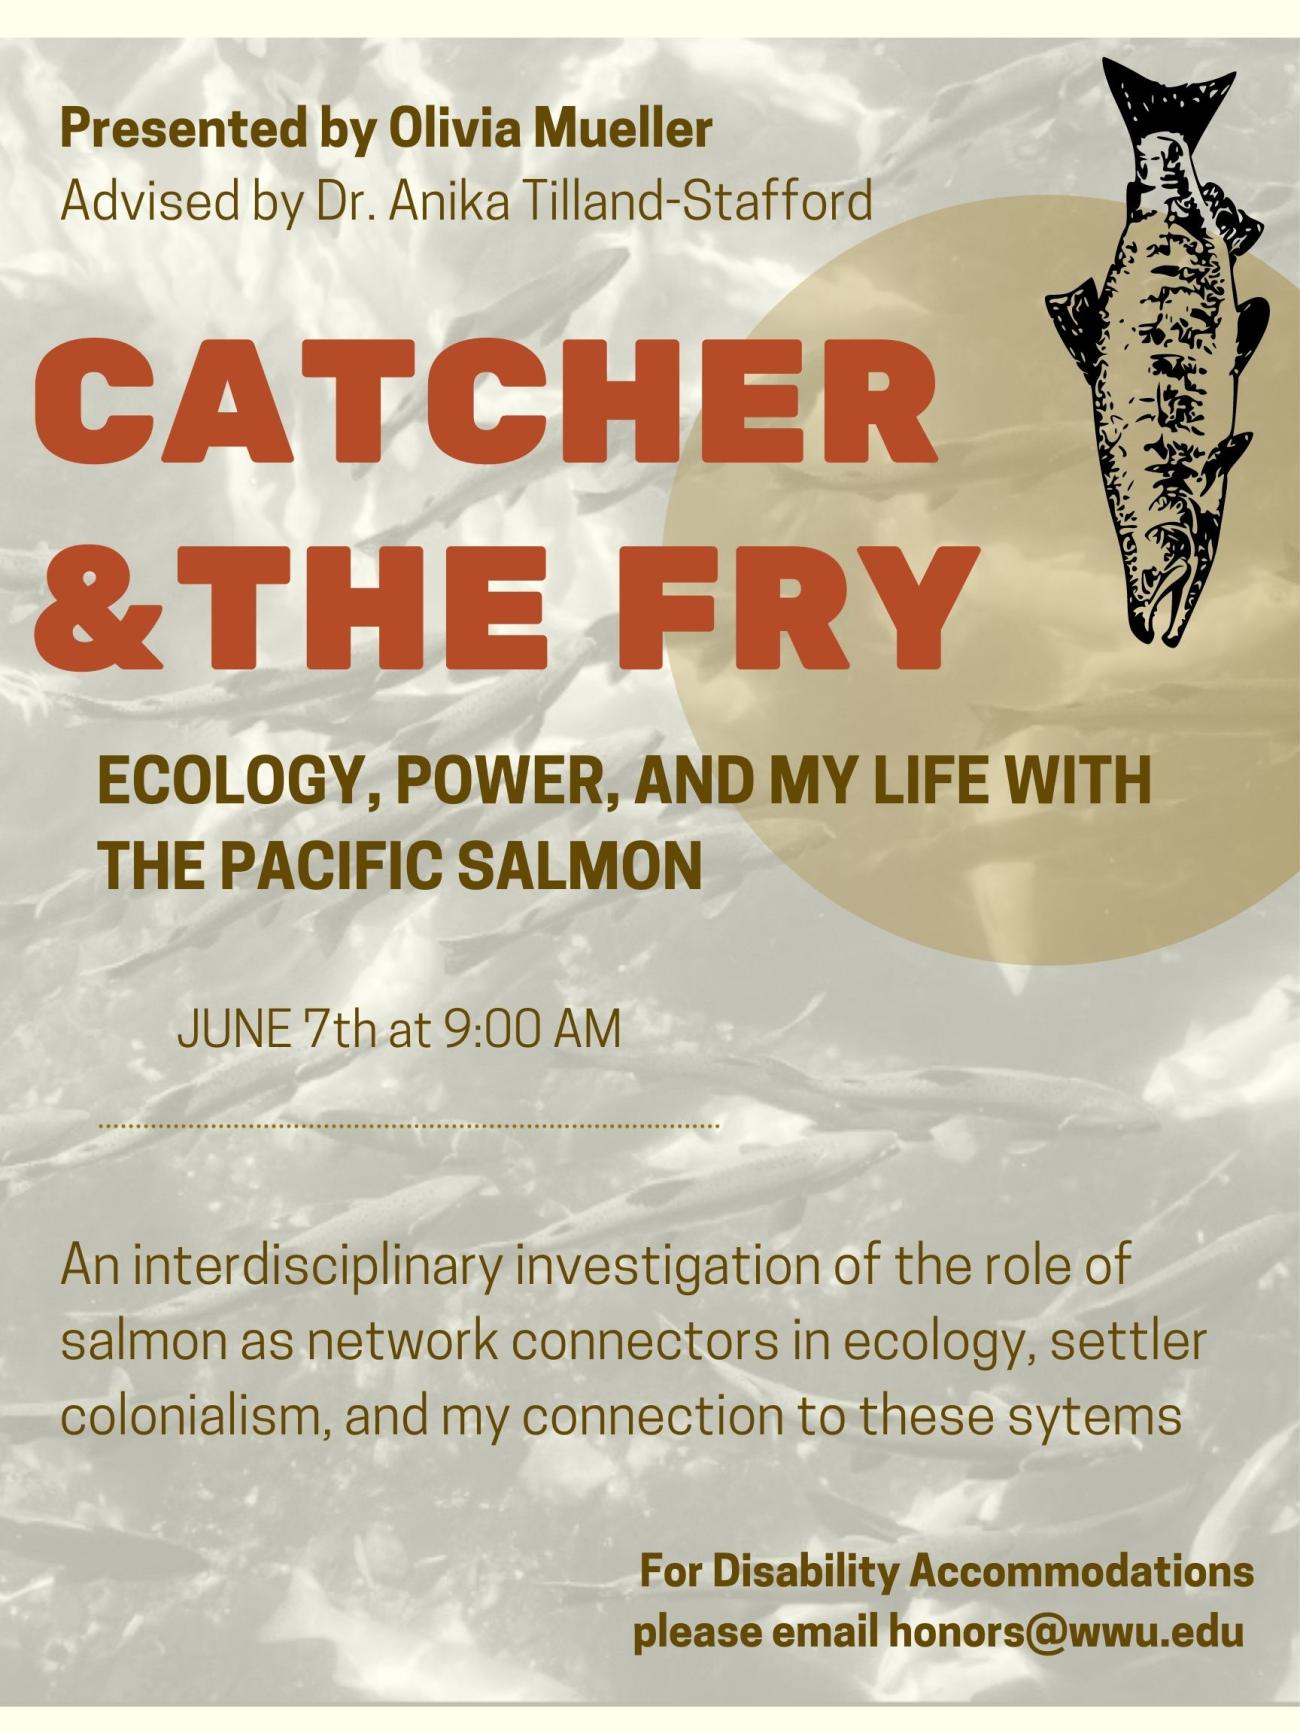 Photo of salmon swimming upstream, with overlaying text in red that reads: "Catcher & the Fry: Ecology, Power, and My Life with the Pacific Salmon. Presented by Olivia Mueller. Advised by Dr. Anika Tilland-Stafford. June 7th at 9:00 AM. An interdisciplinary investigation of the role of salmon as network connectors in ecology, settler colonialism, and my connection to these systems. For disability accommodations please email honors@wwu.edu". 